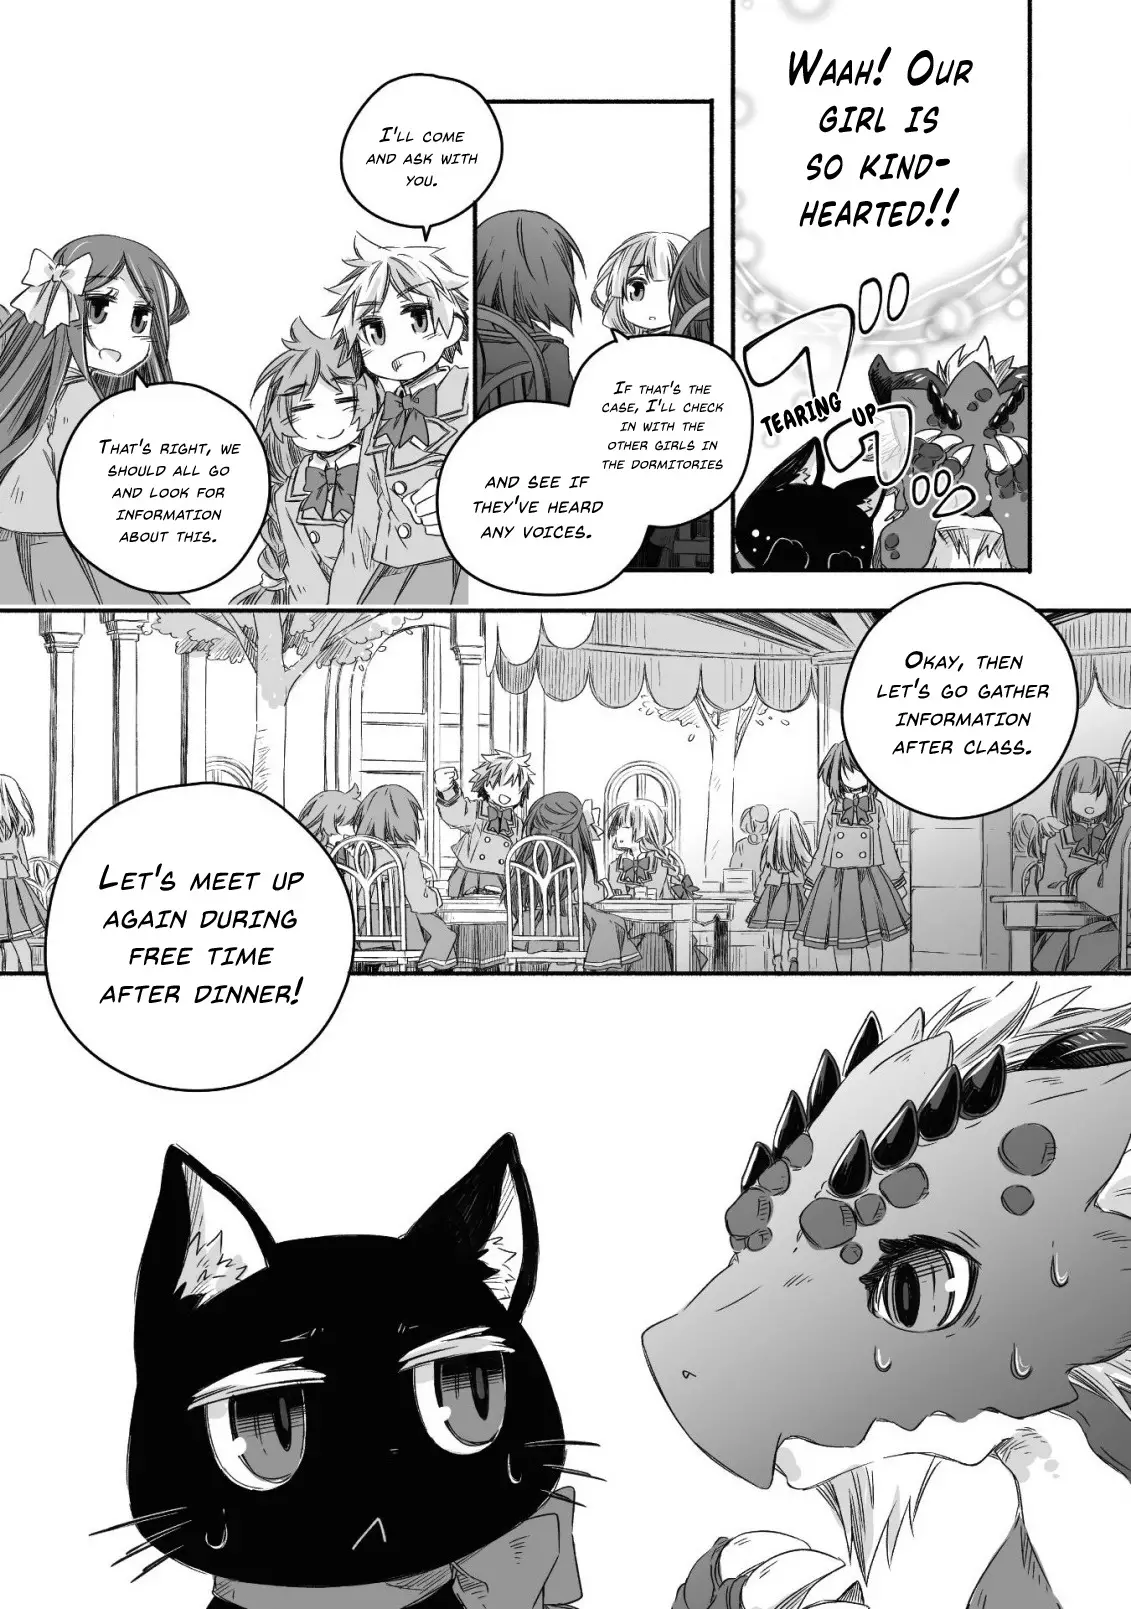 Parenting Diary Of The Strongest Dragon Who Suddenly Became A Dad ～ Cute Daughter, Heartwarming And Growing Up To Be The Strongest In The Human World ～ - 15 page 22-c57e31fa